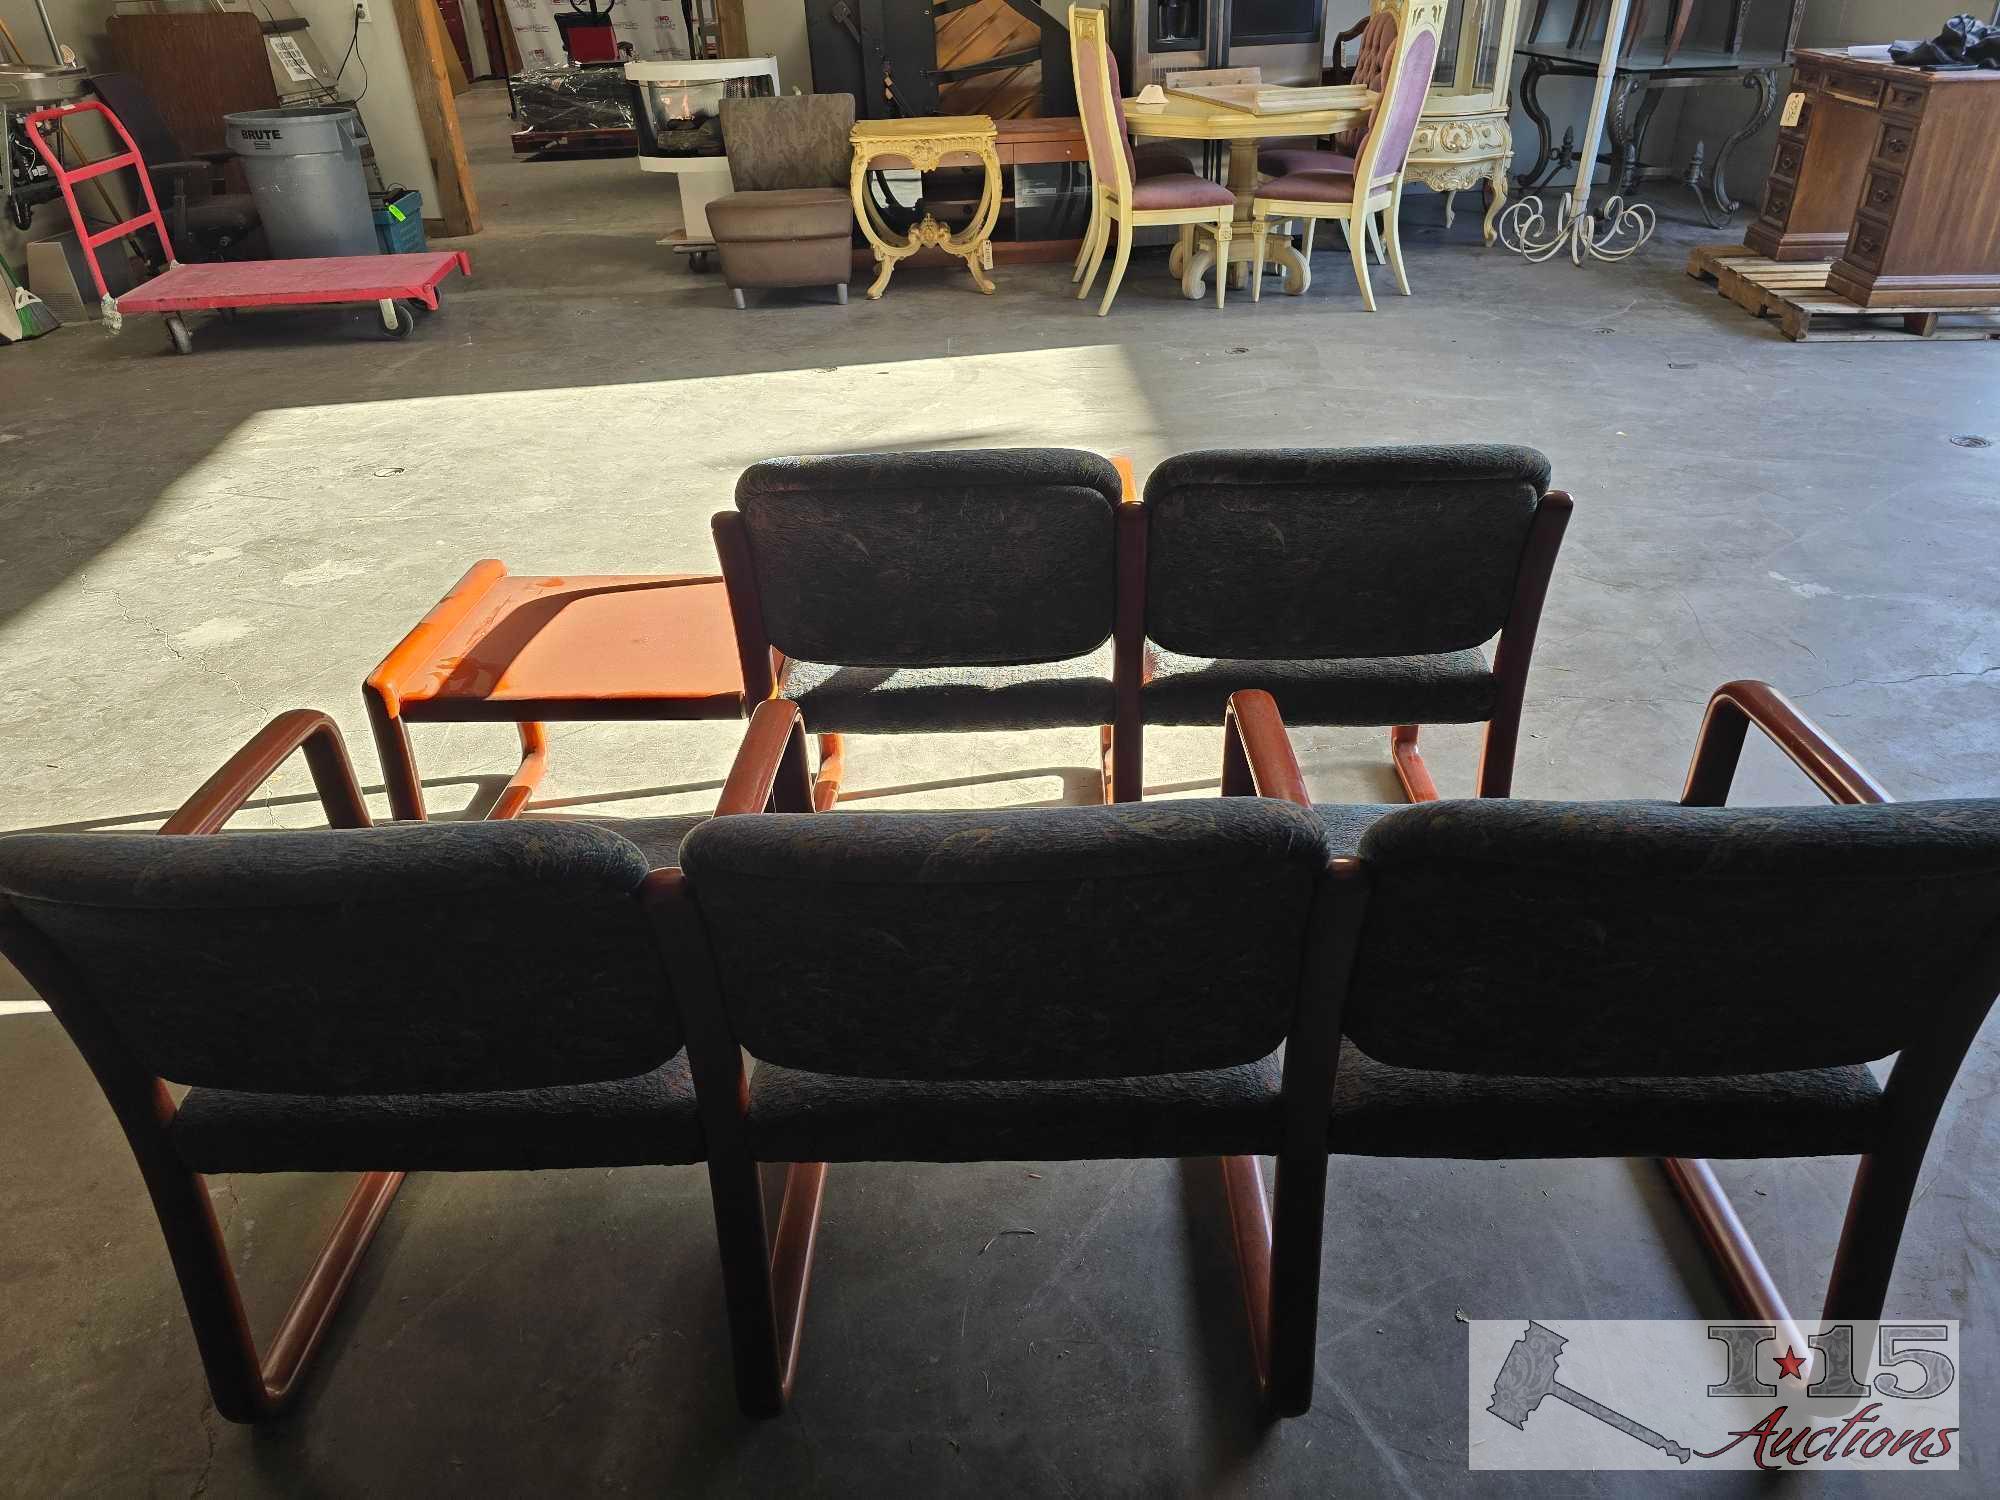 Prairie 3 Seat Chair with Center Arms and Prairie 2 Seat Chair with Center Arms and Table